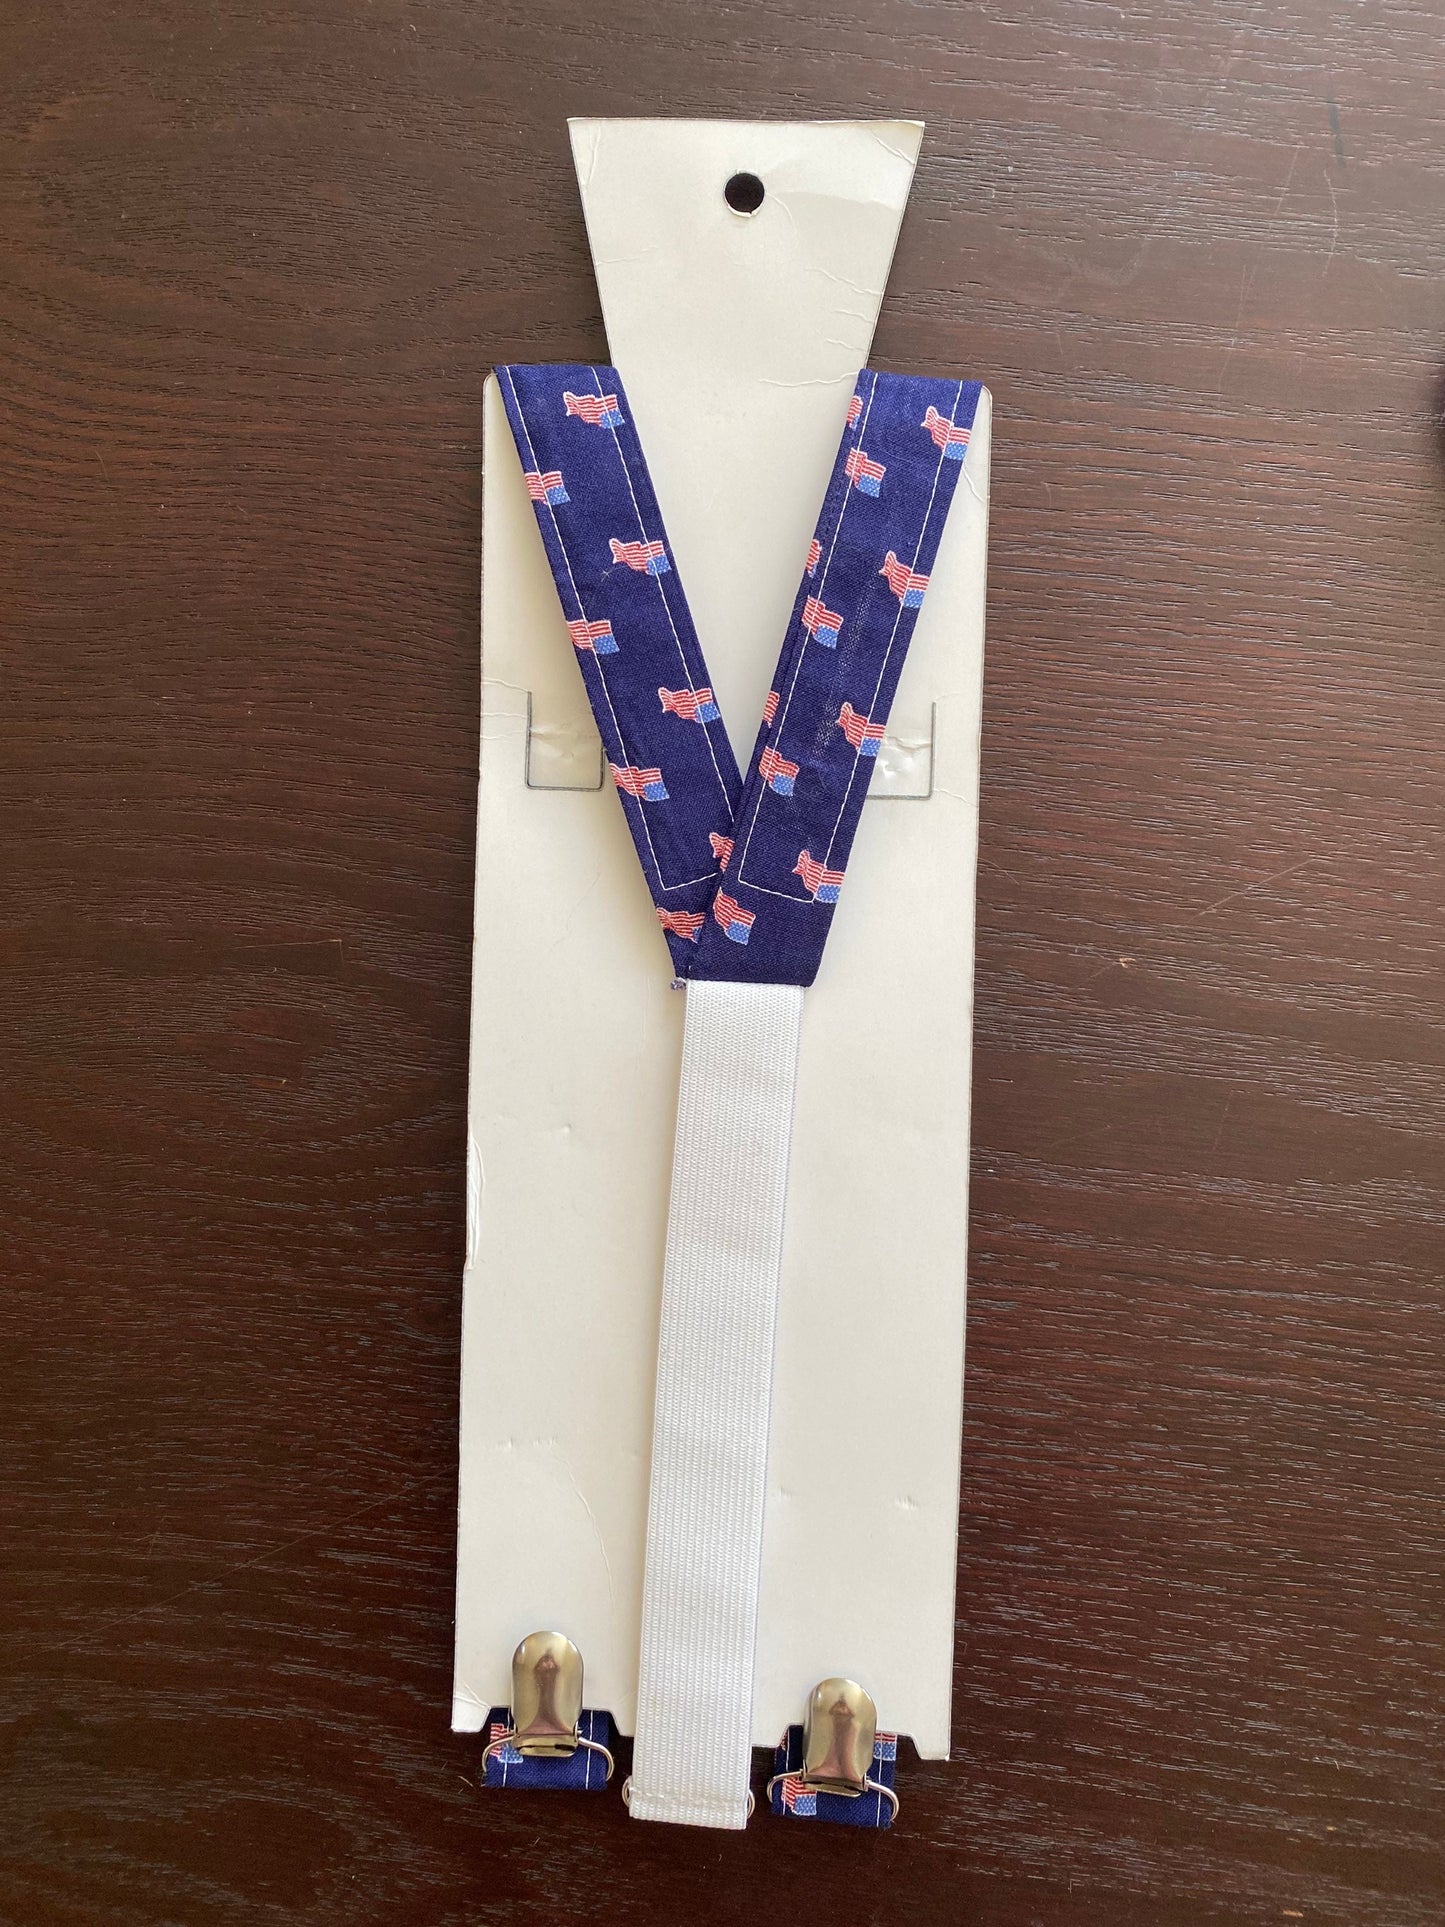 Patriotic American flag bow tie and suspenders custom bowtie all sizes made to order